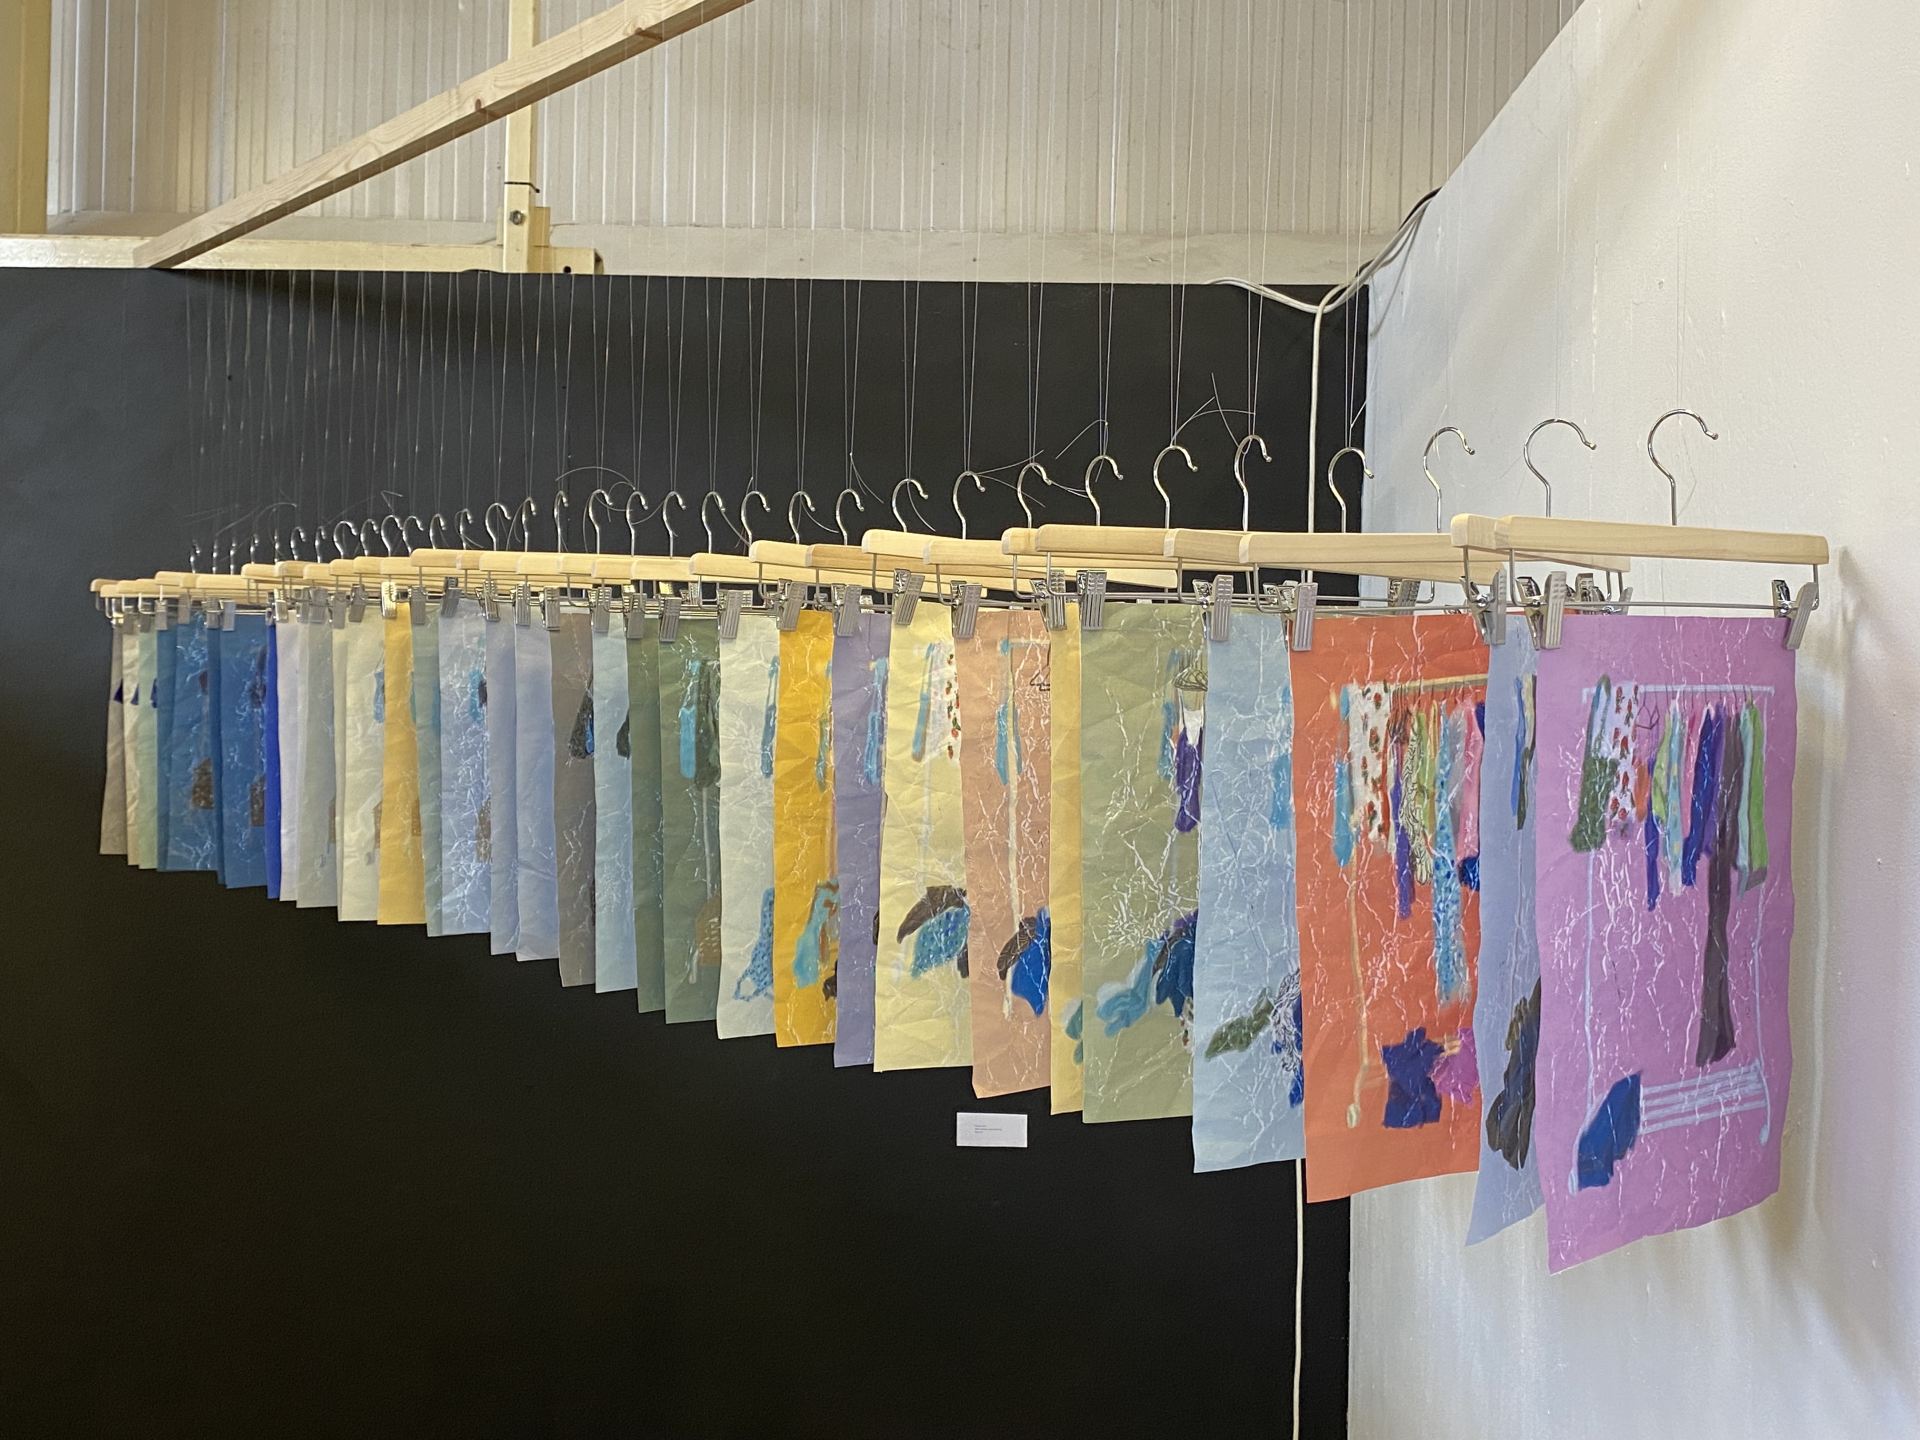 The daily changes of the clothing rack for three months have been recorded through painting.
